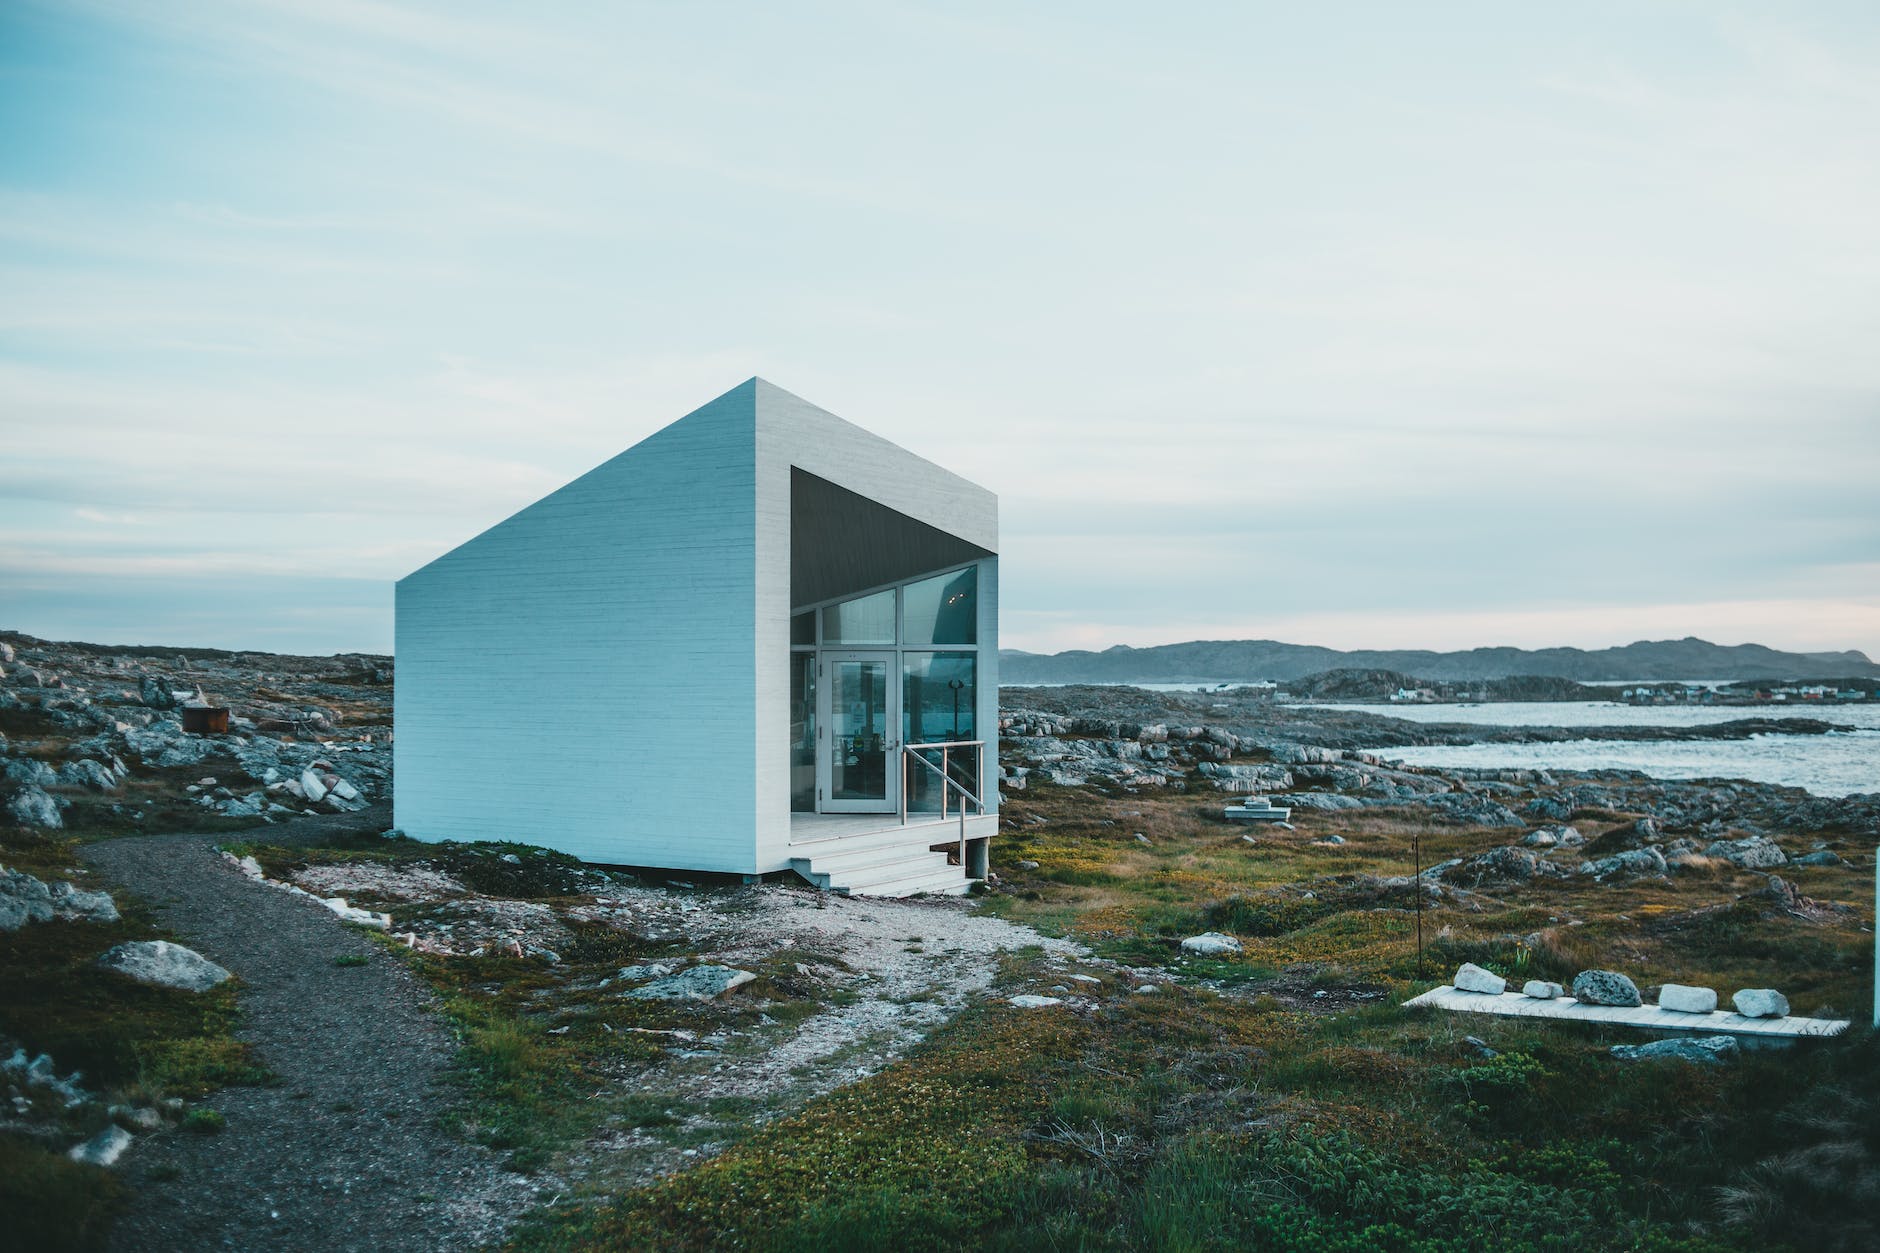 newly built tiny house on the rocky shore is a great example of when a home is tiny